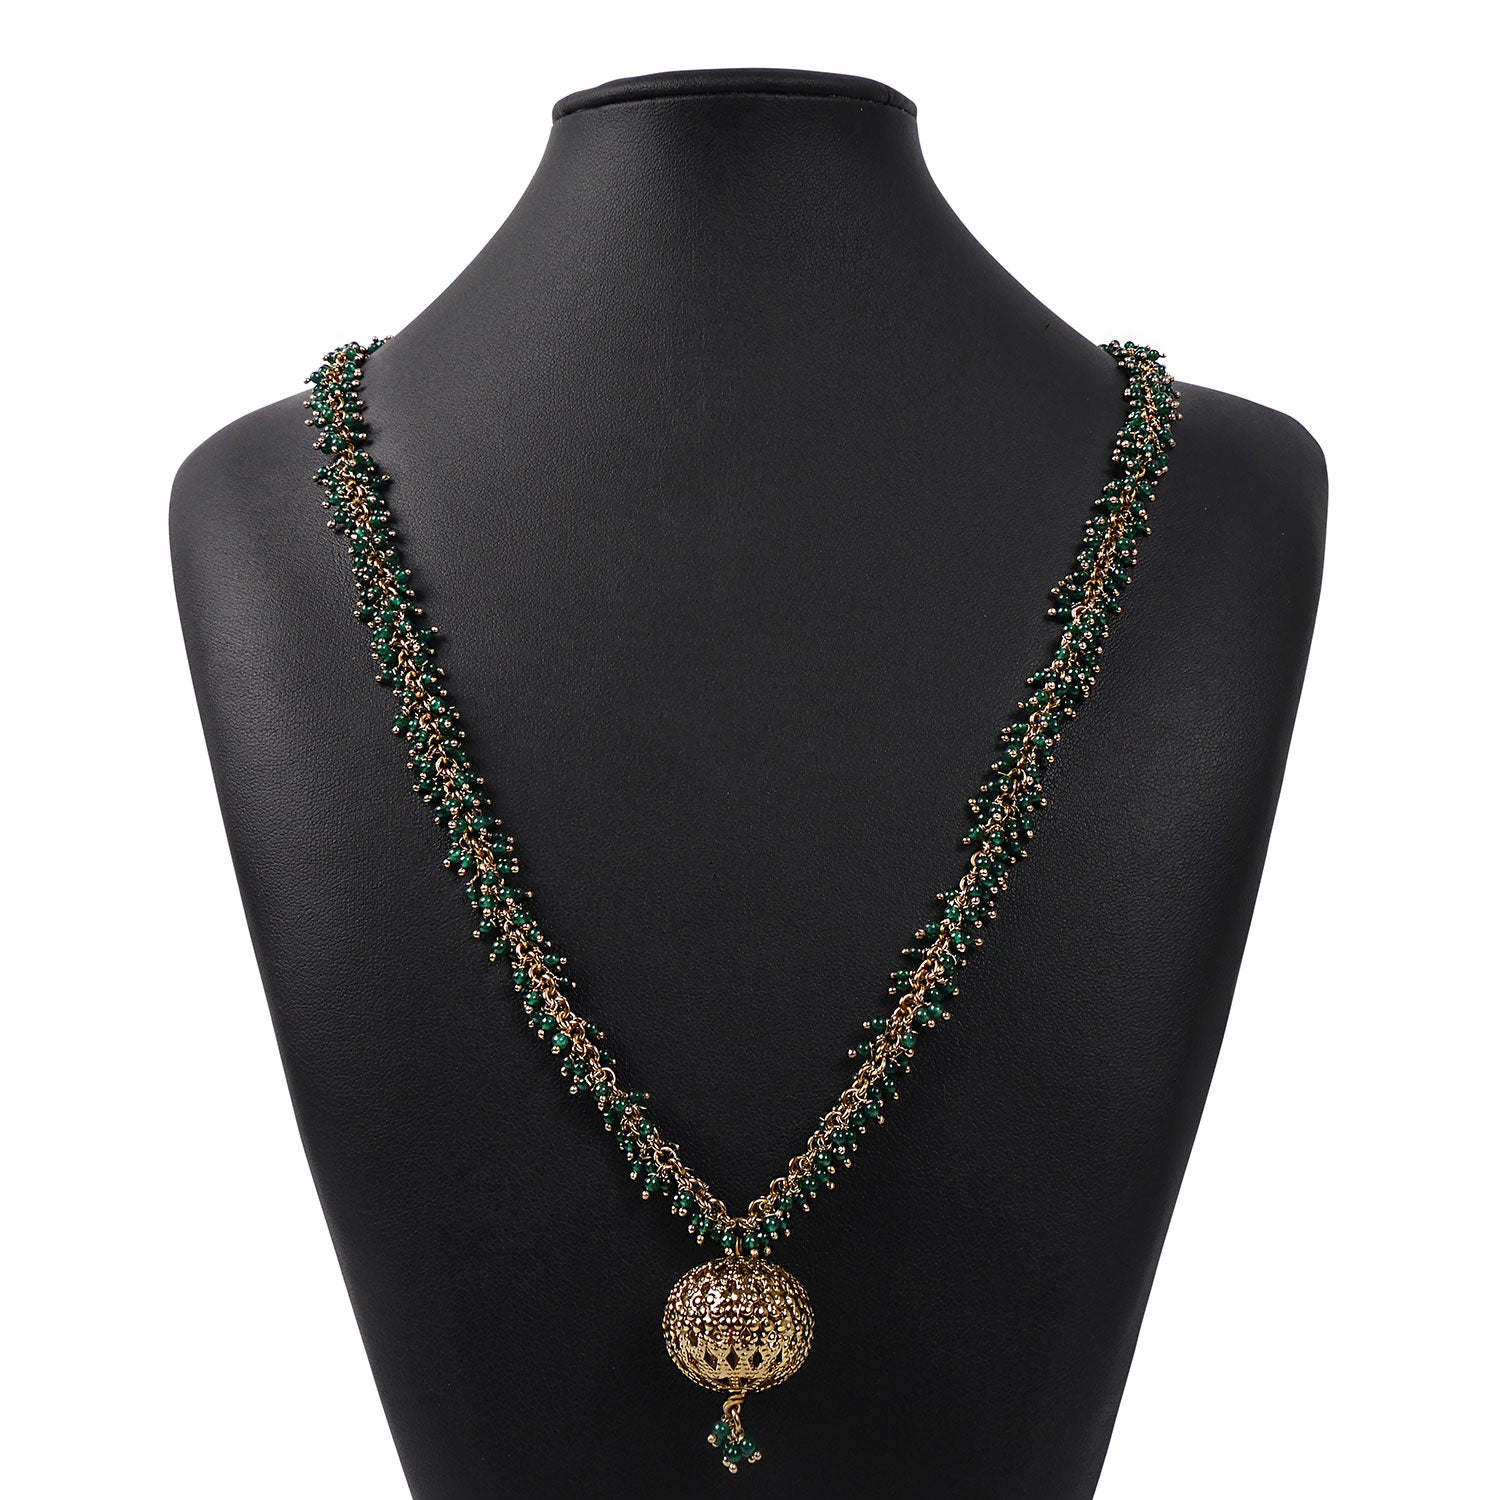 Kinara Cluster Necklace in Green